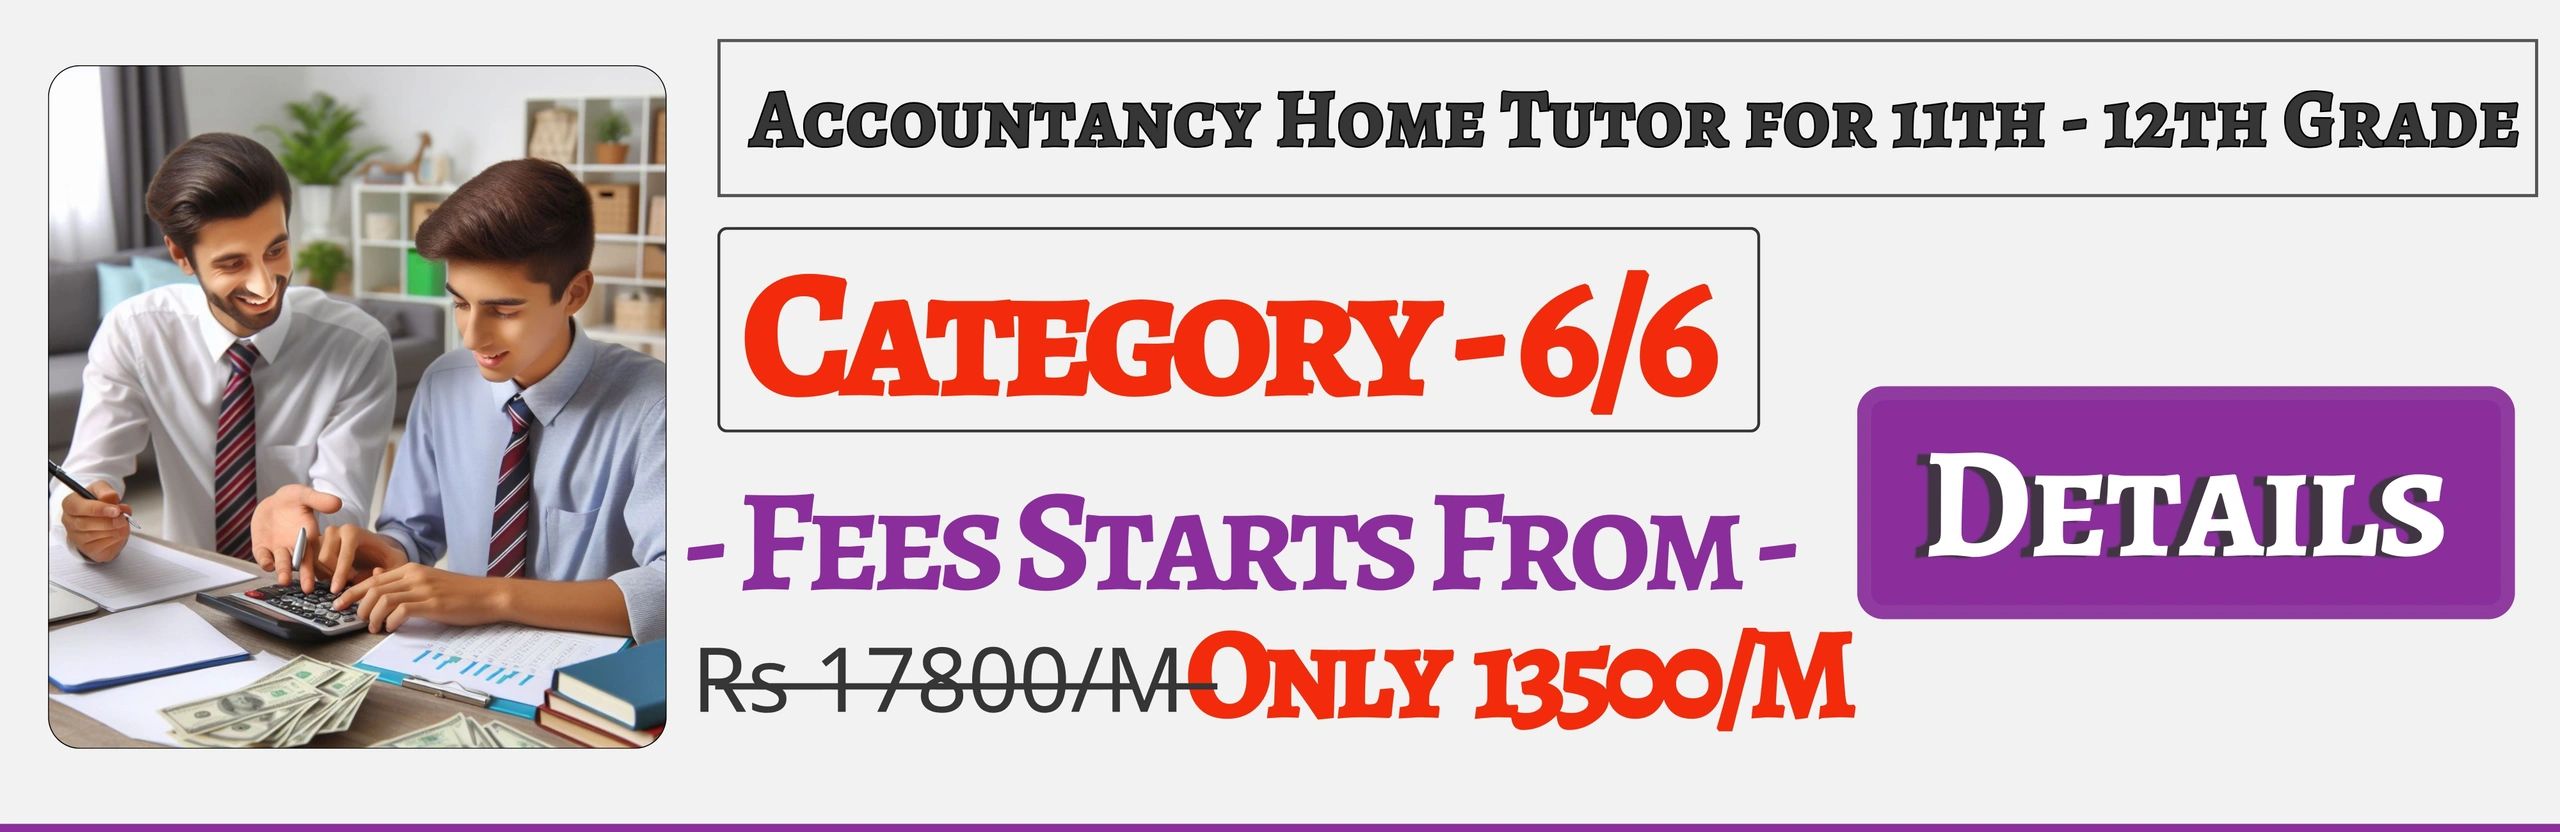 Book Best Nearby Accountancy Home Tuition Tutors For 11th & 12th Jaipur ,Fees Only 13500/M